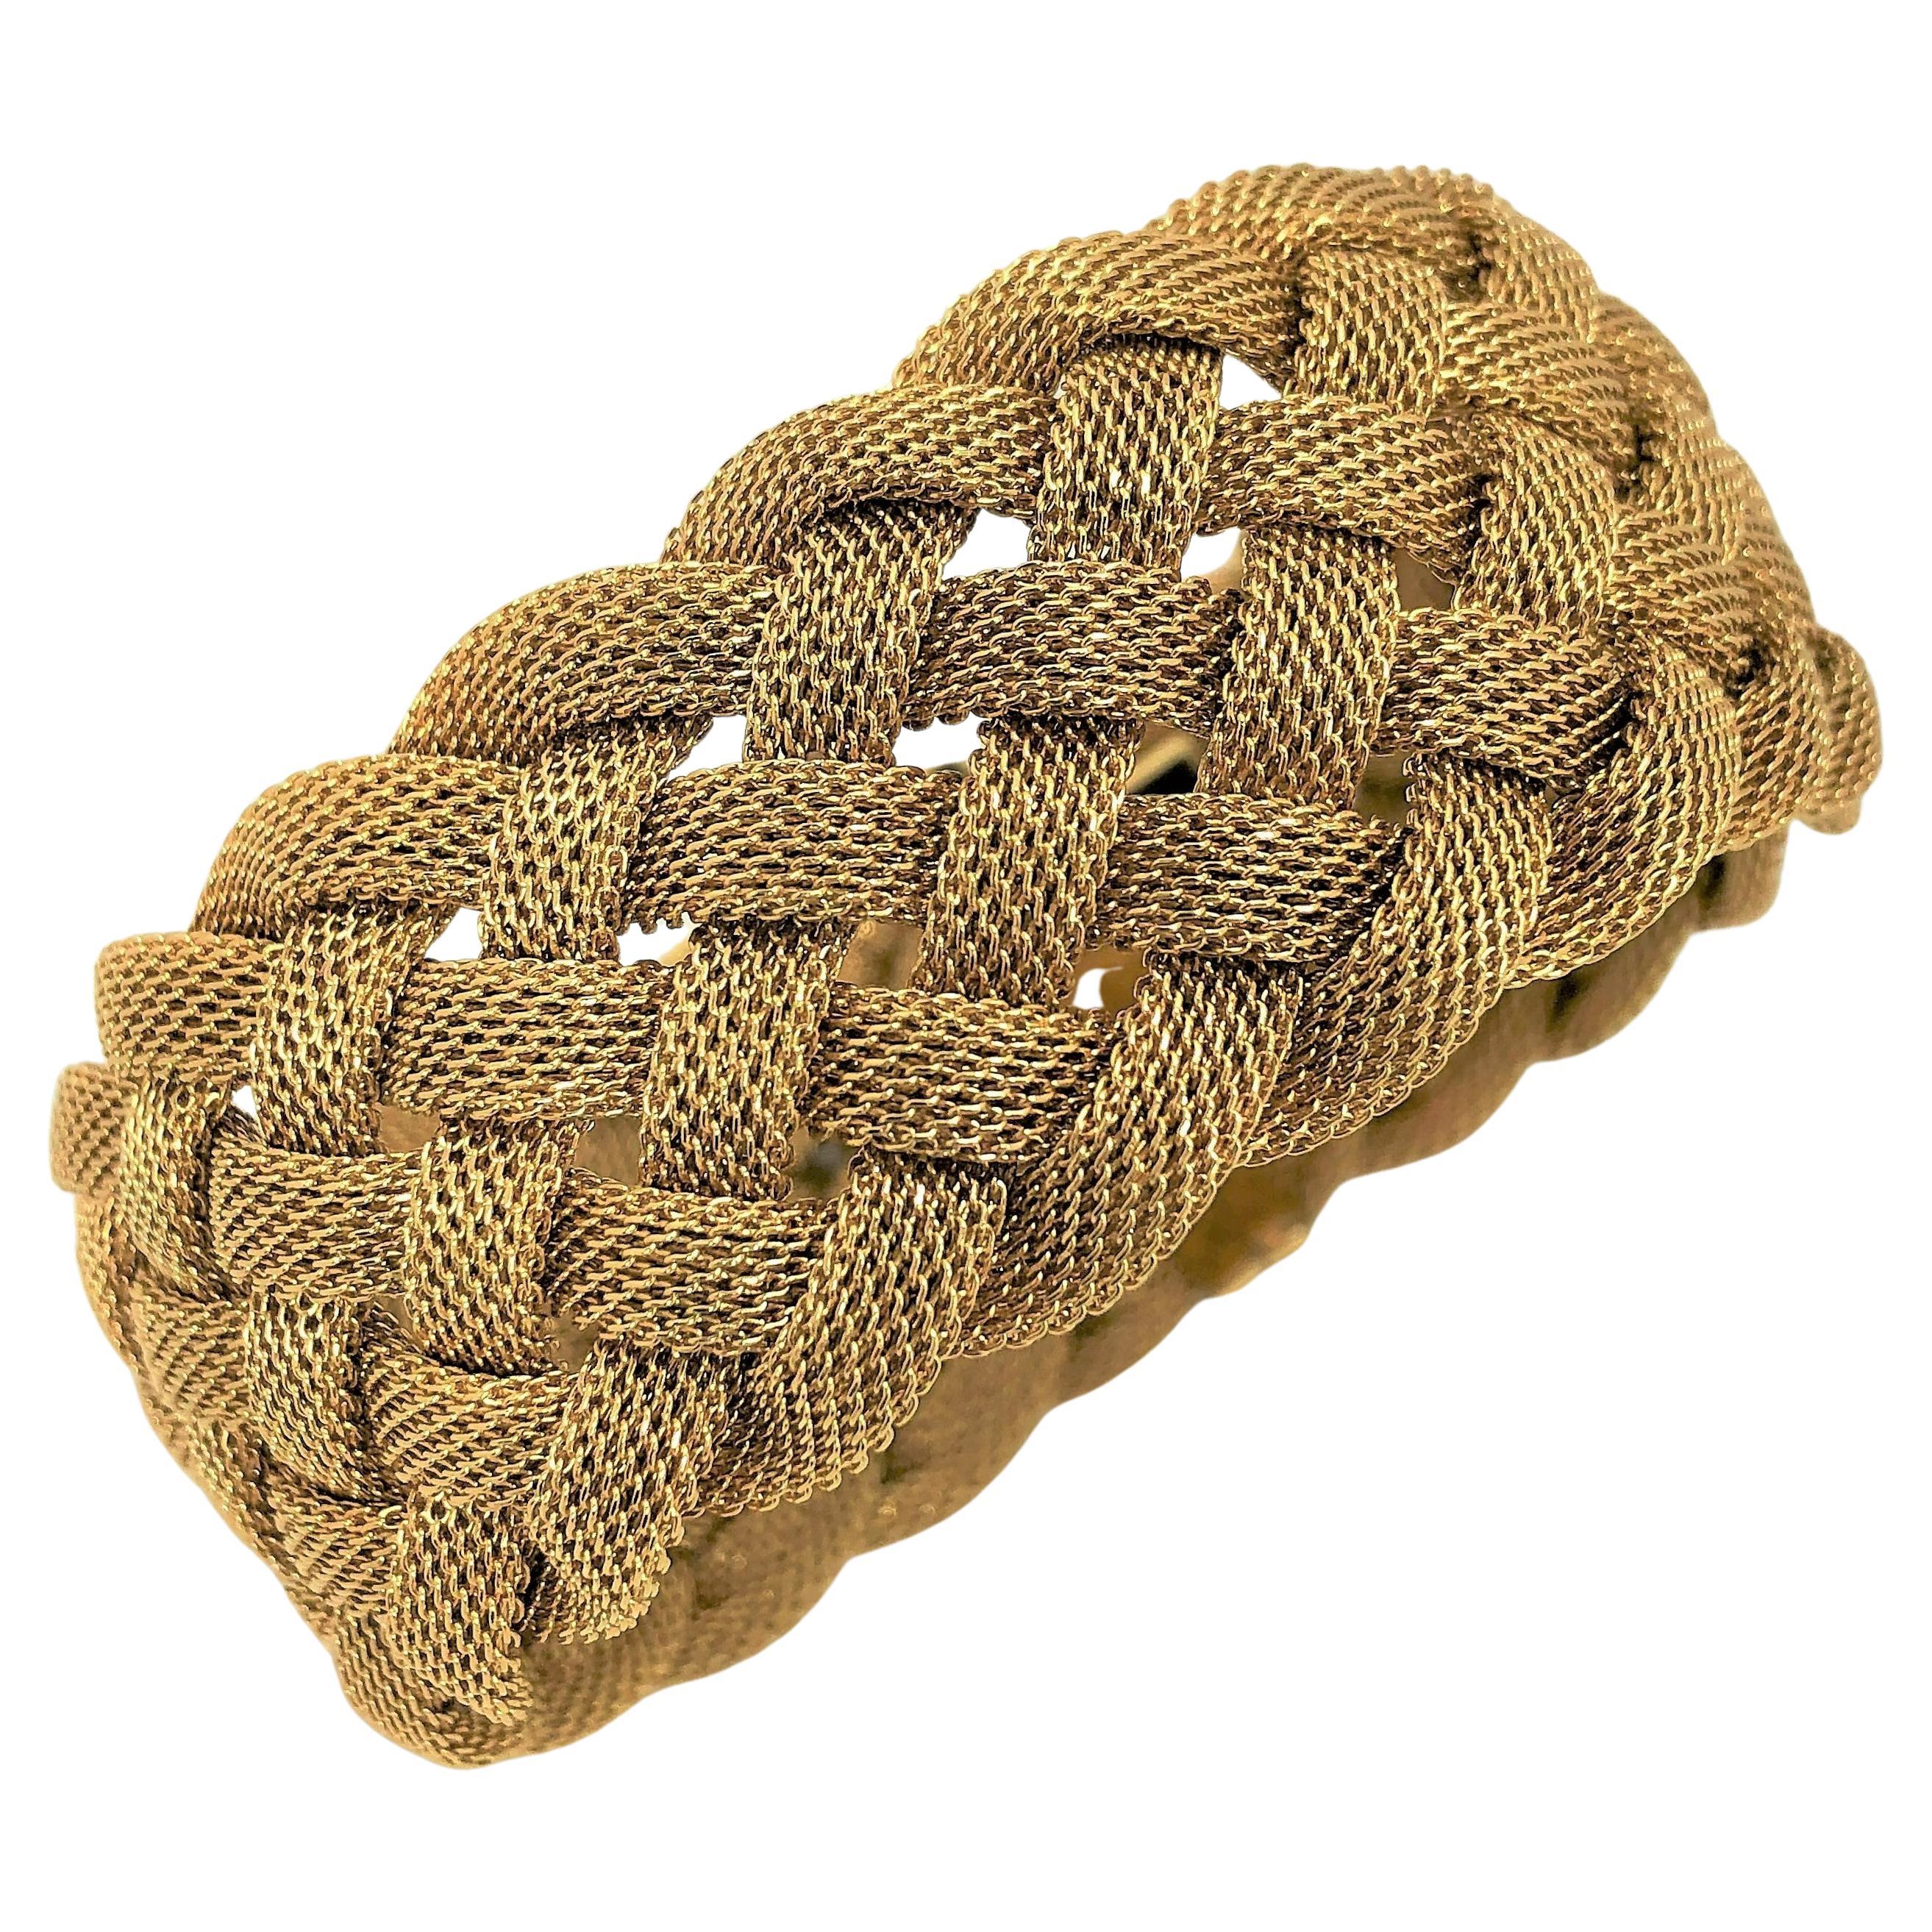 Made by Tiffany & Co late in the 20th Century, this 18K yellow gold mesh bracelet has a curved, bombee look to it. Rather than just laying flat, the 7 curved mesh strands, stand off the arm giving it a more substantial look and feeling. This